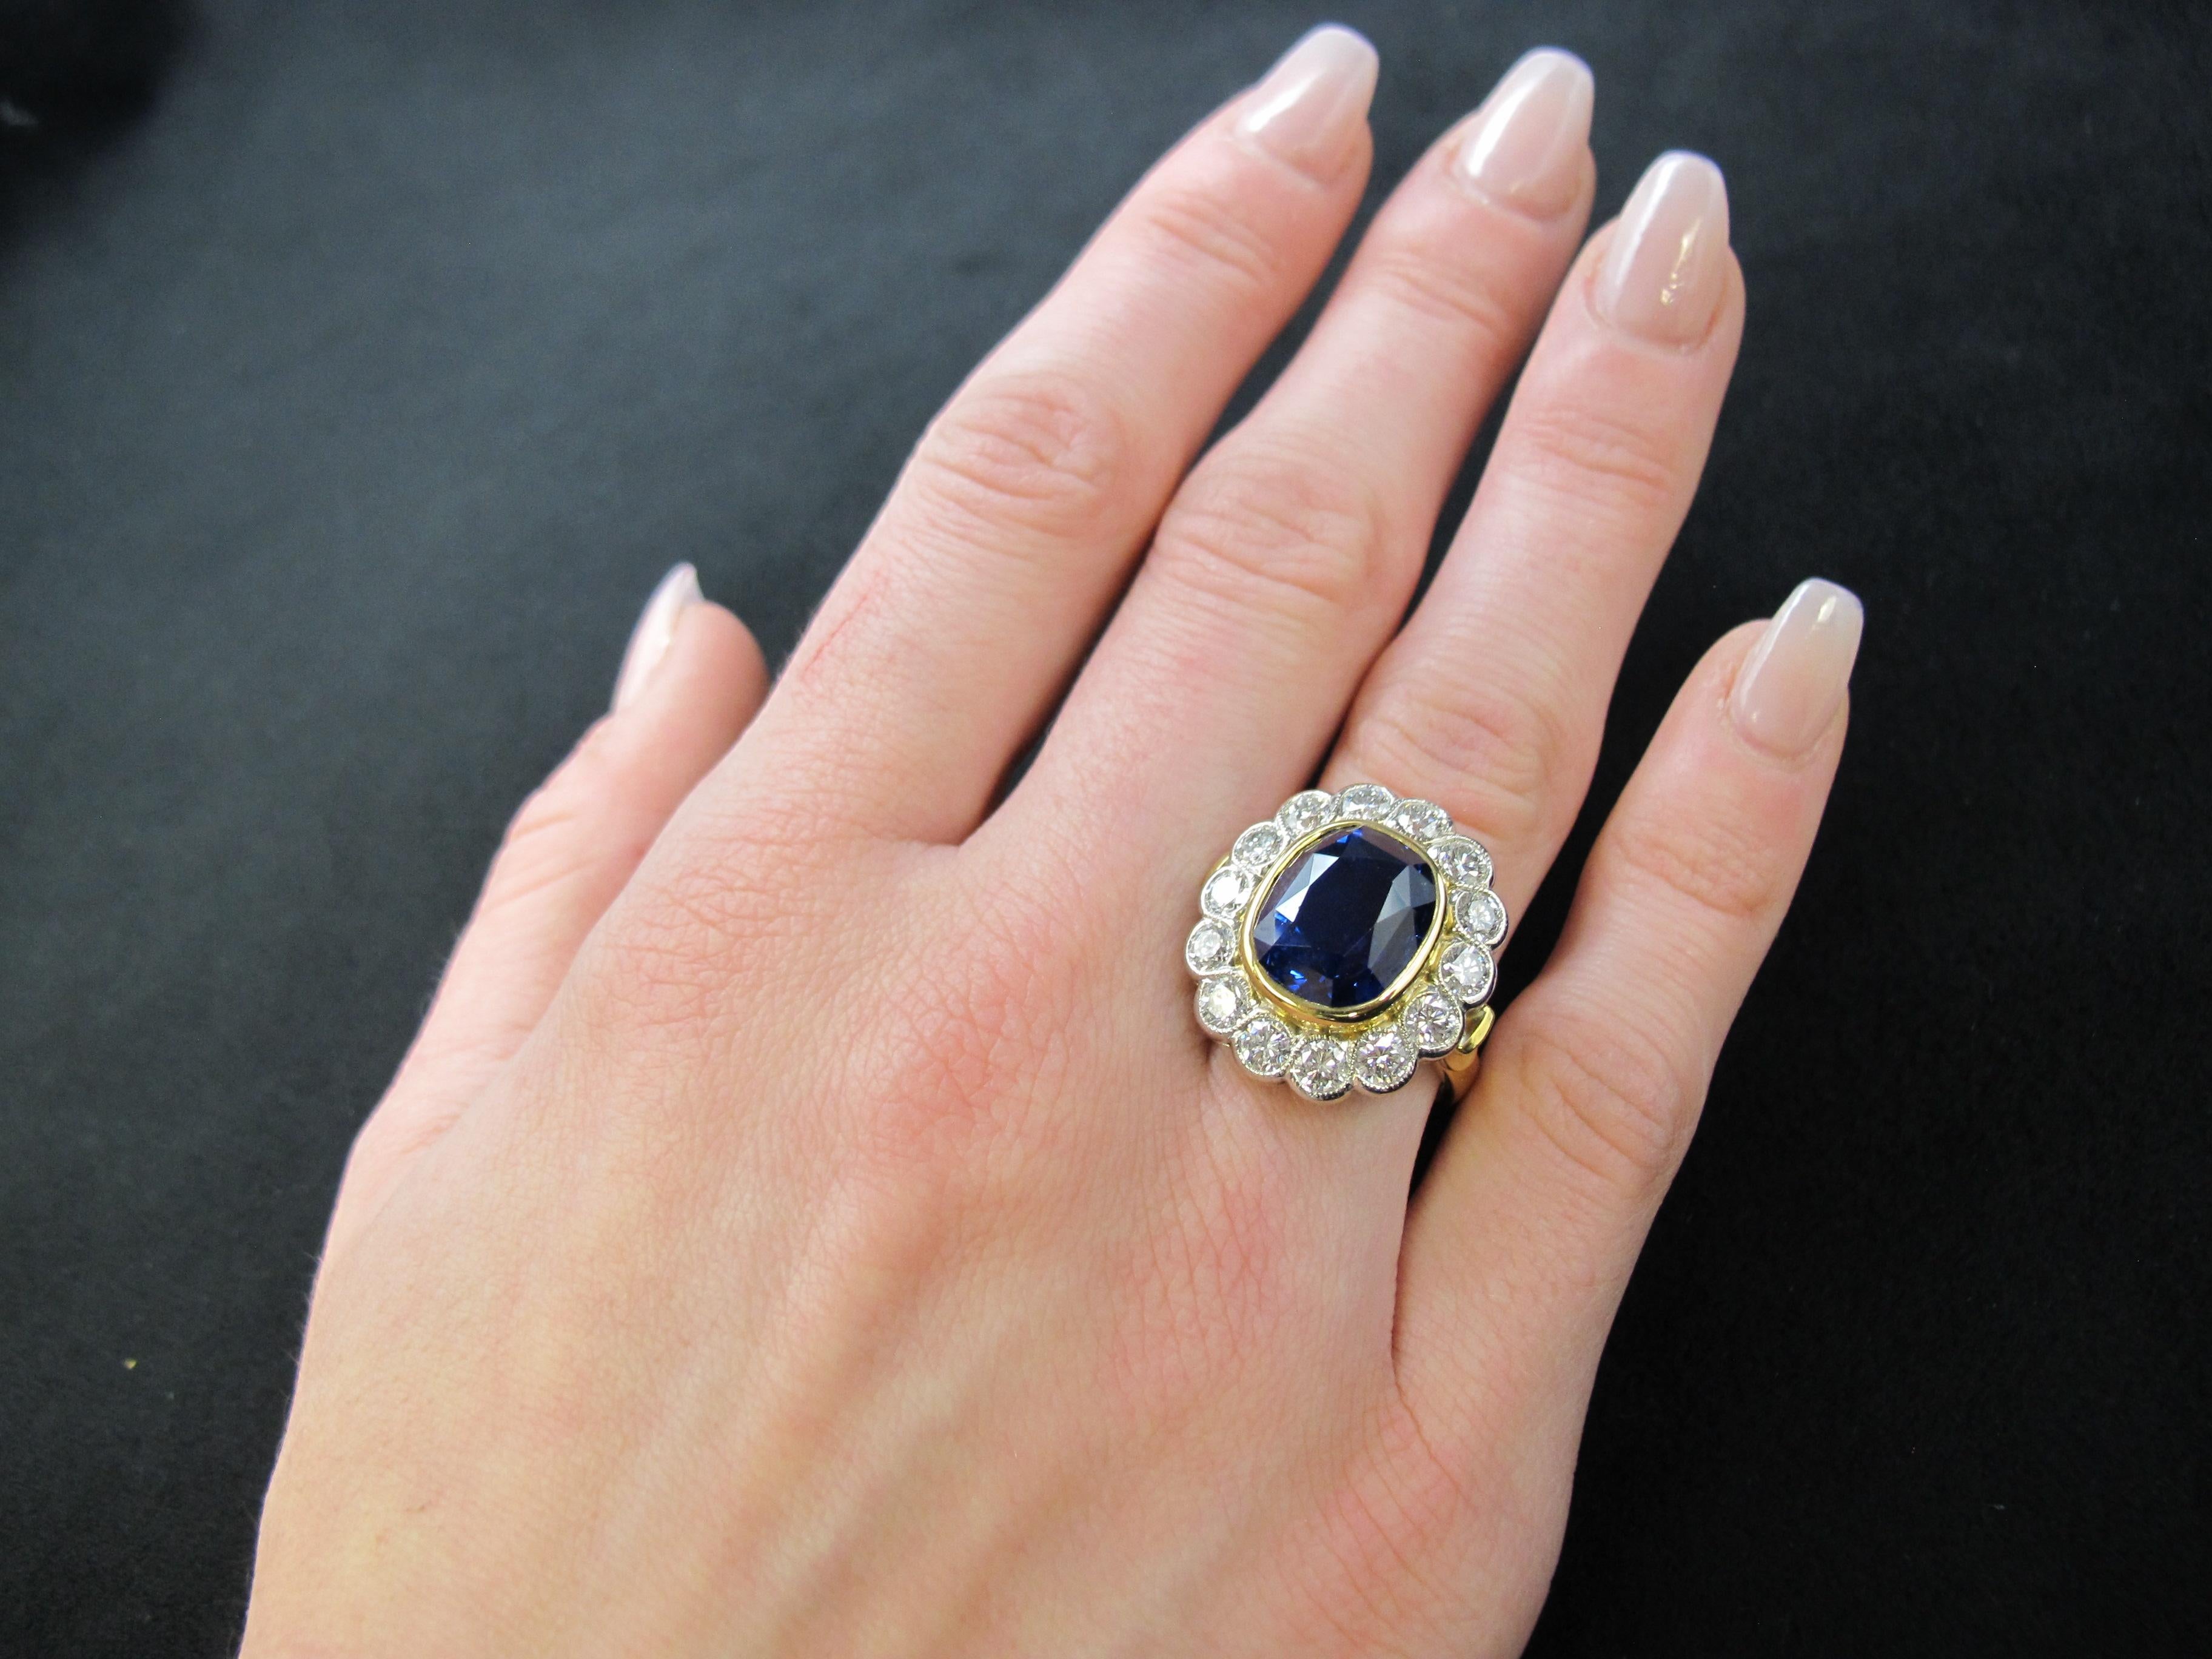 GIA Certified 10.16 Carat Ceylon Blue Sapphire and Diamond Cocktail Ring For Sale 5